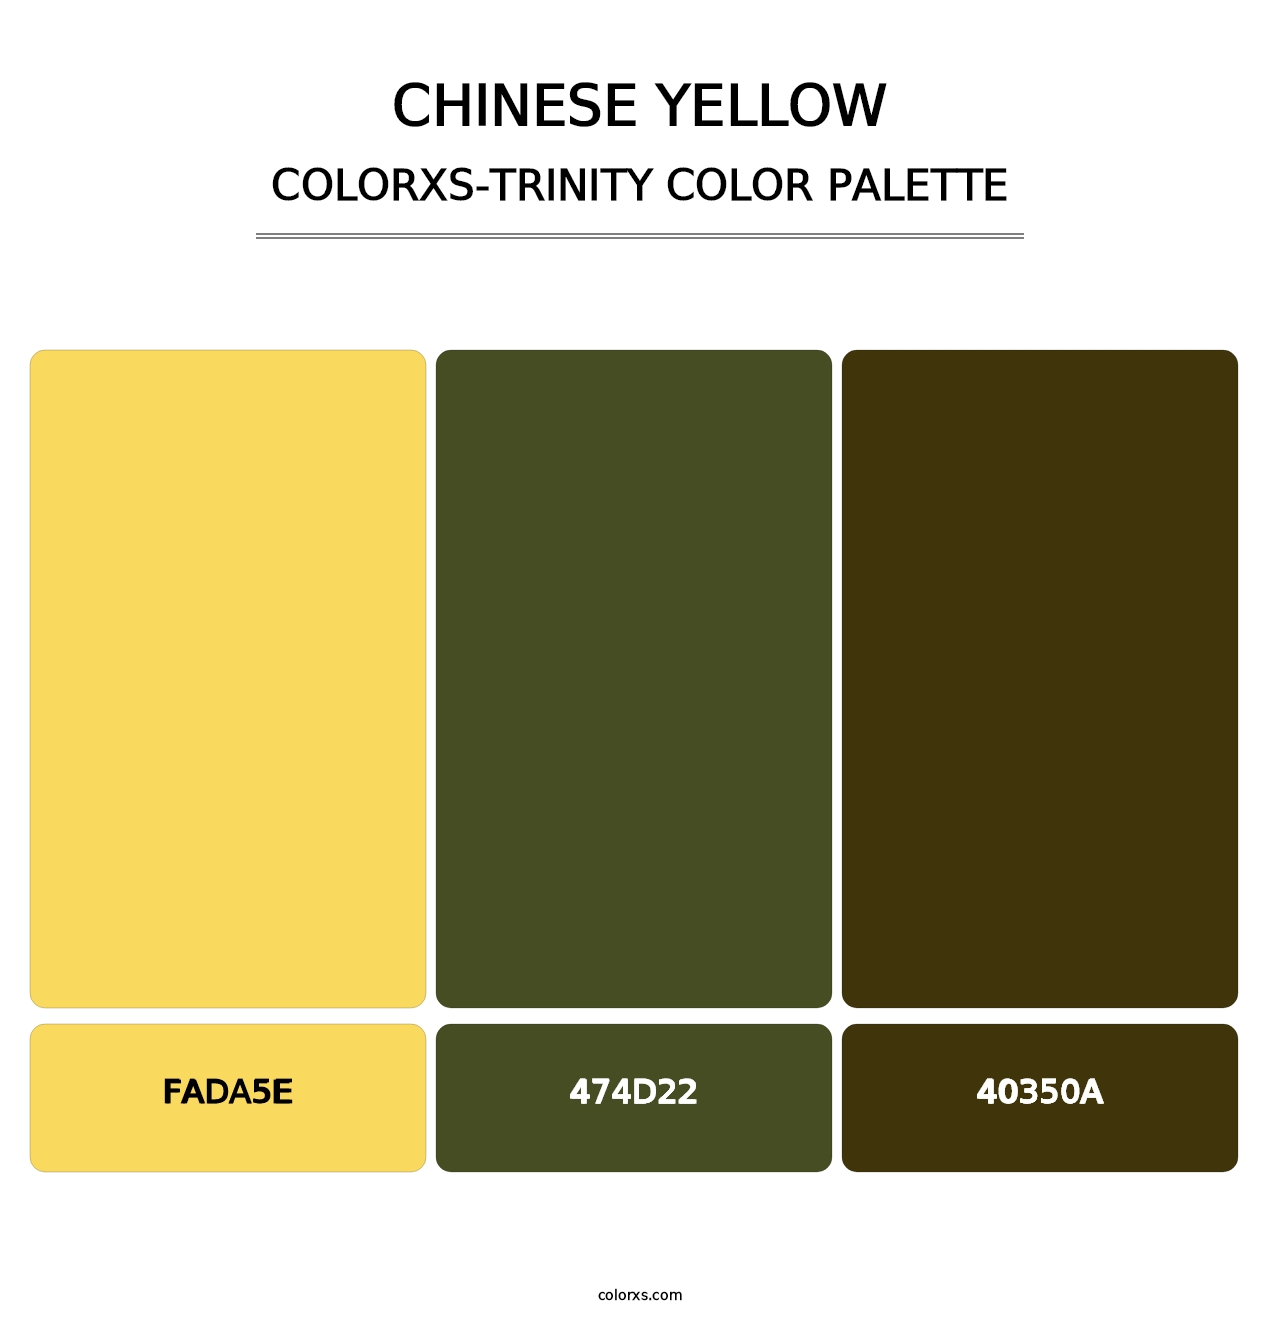 Chinese Yellow - Colorxs Trinity Palette